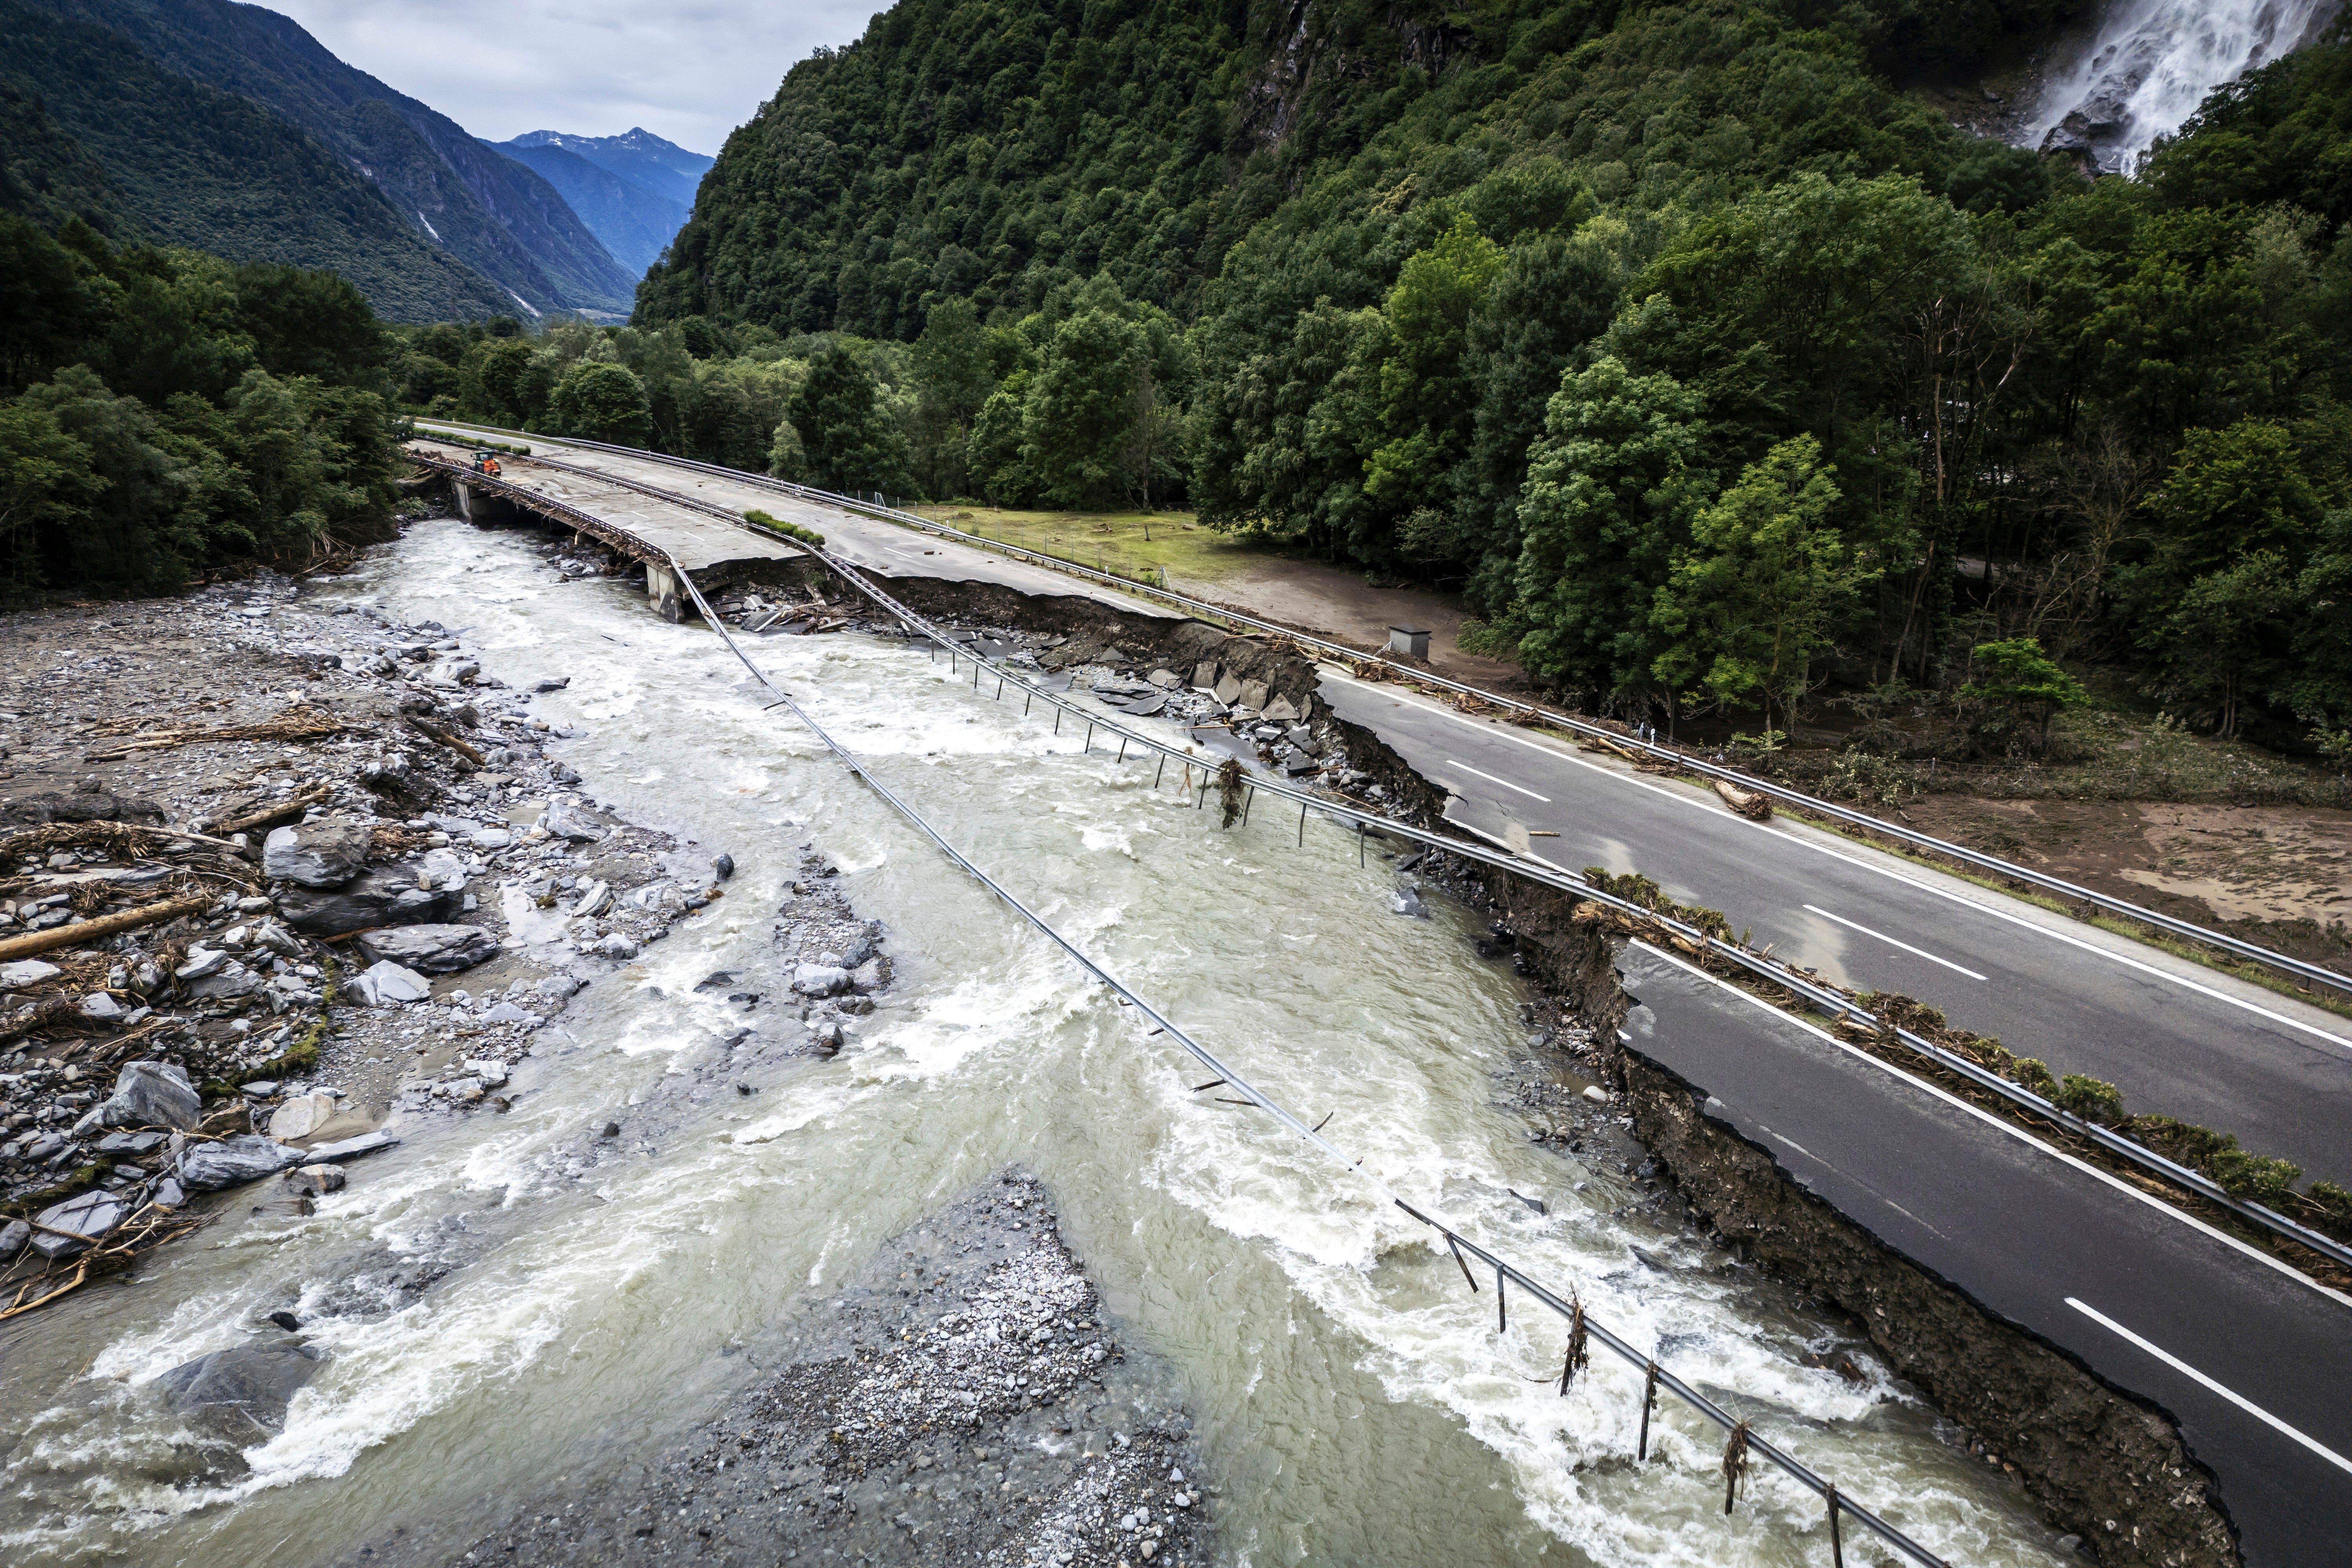 The highway A13 between Lostallo and Soazza is seen destroyed by the force of the Moesa river, caused by heavy rain